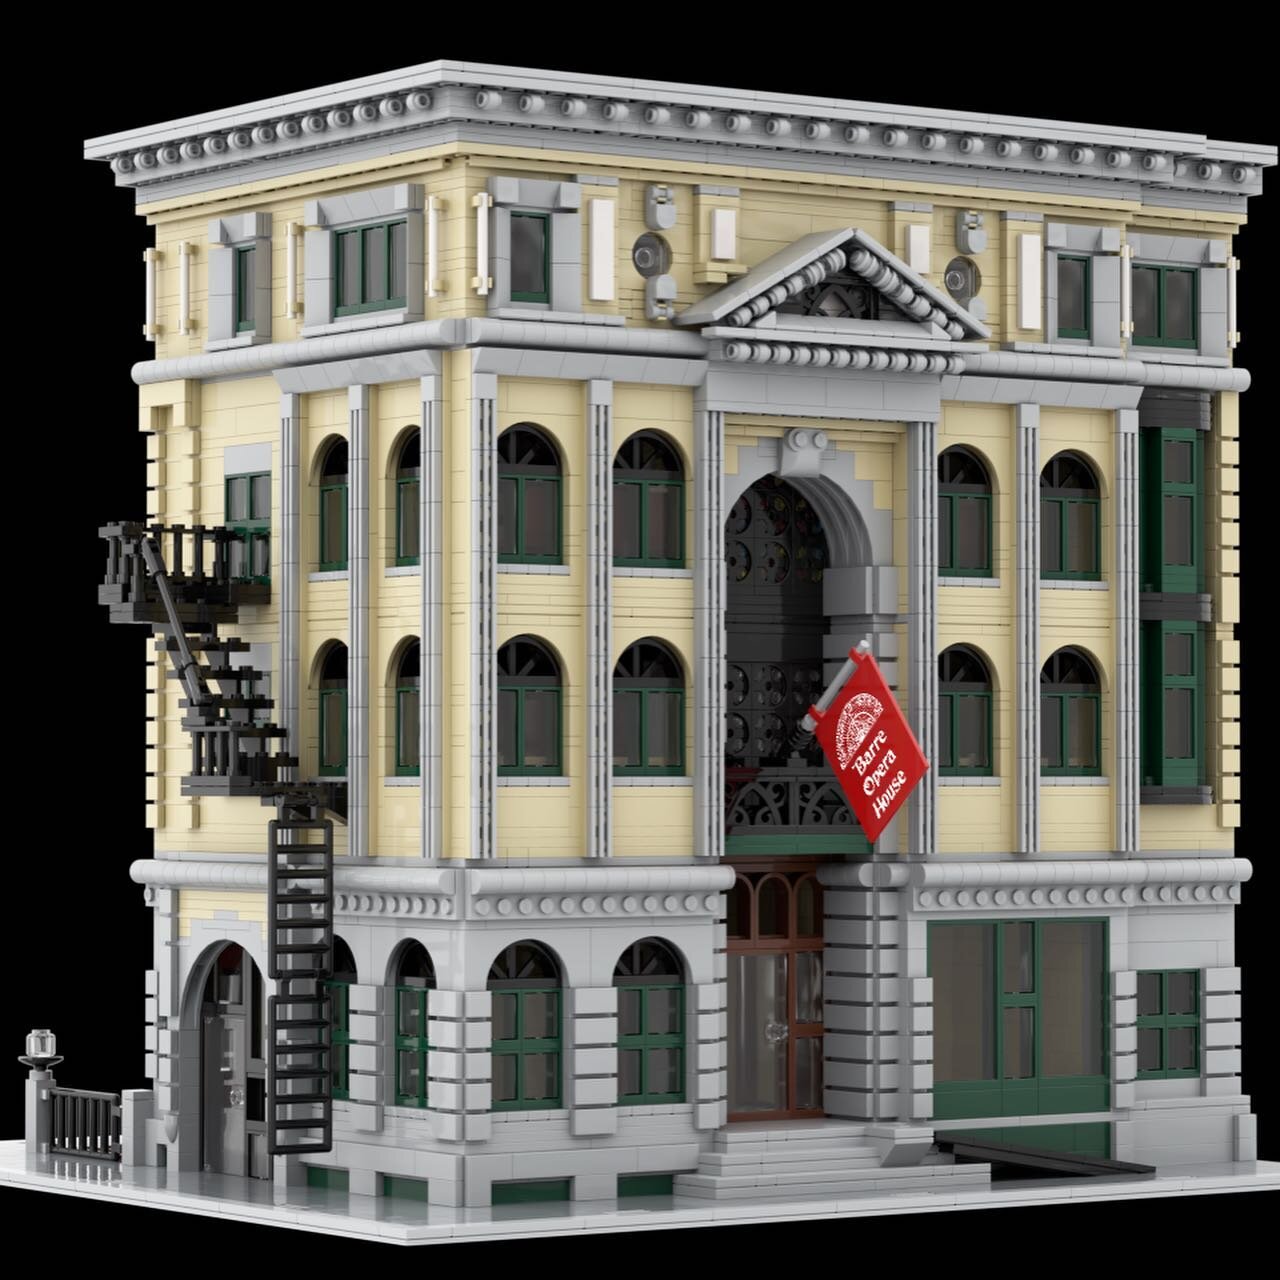 Lately, I&rsquo;ve been having fun with Studio, a digital LEGO designer. Here&rsquo;s my version of the Barre Opera House, scaled to fit a LEGO modular city. Swipe through to see the real opera house at the end! What have you been making lately?
#btm